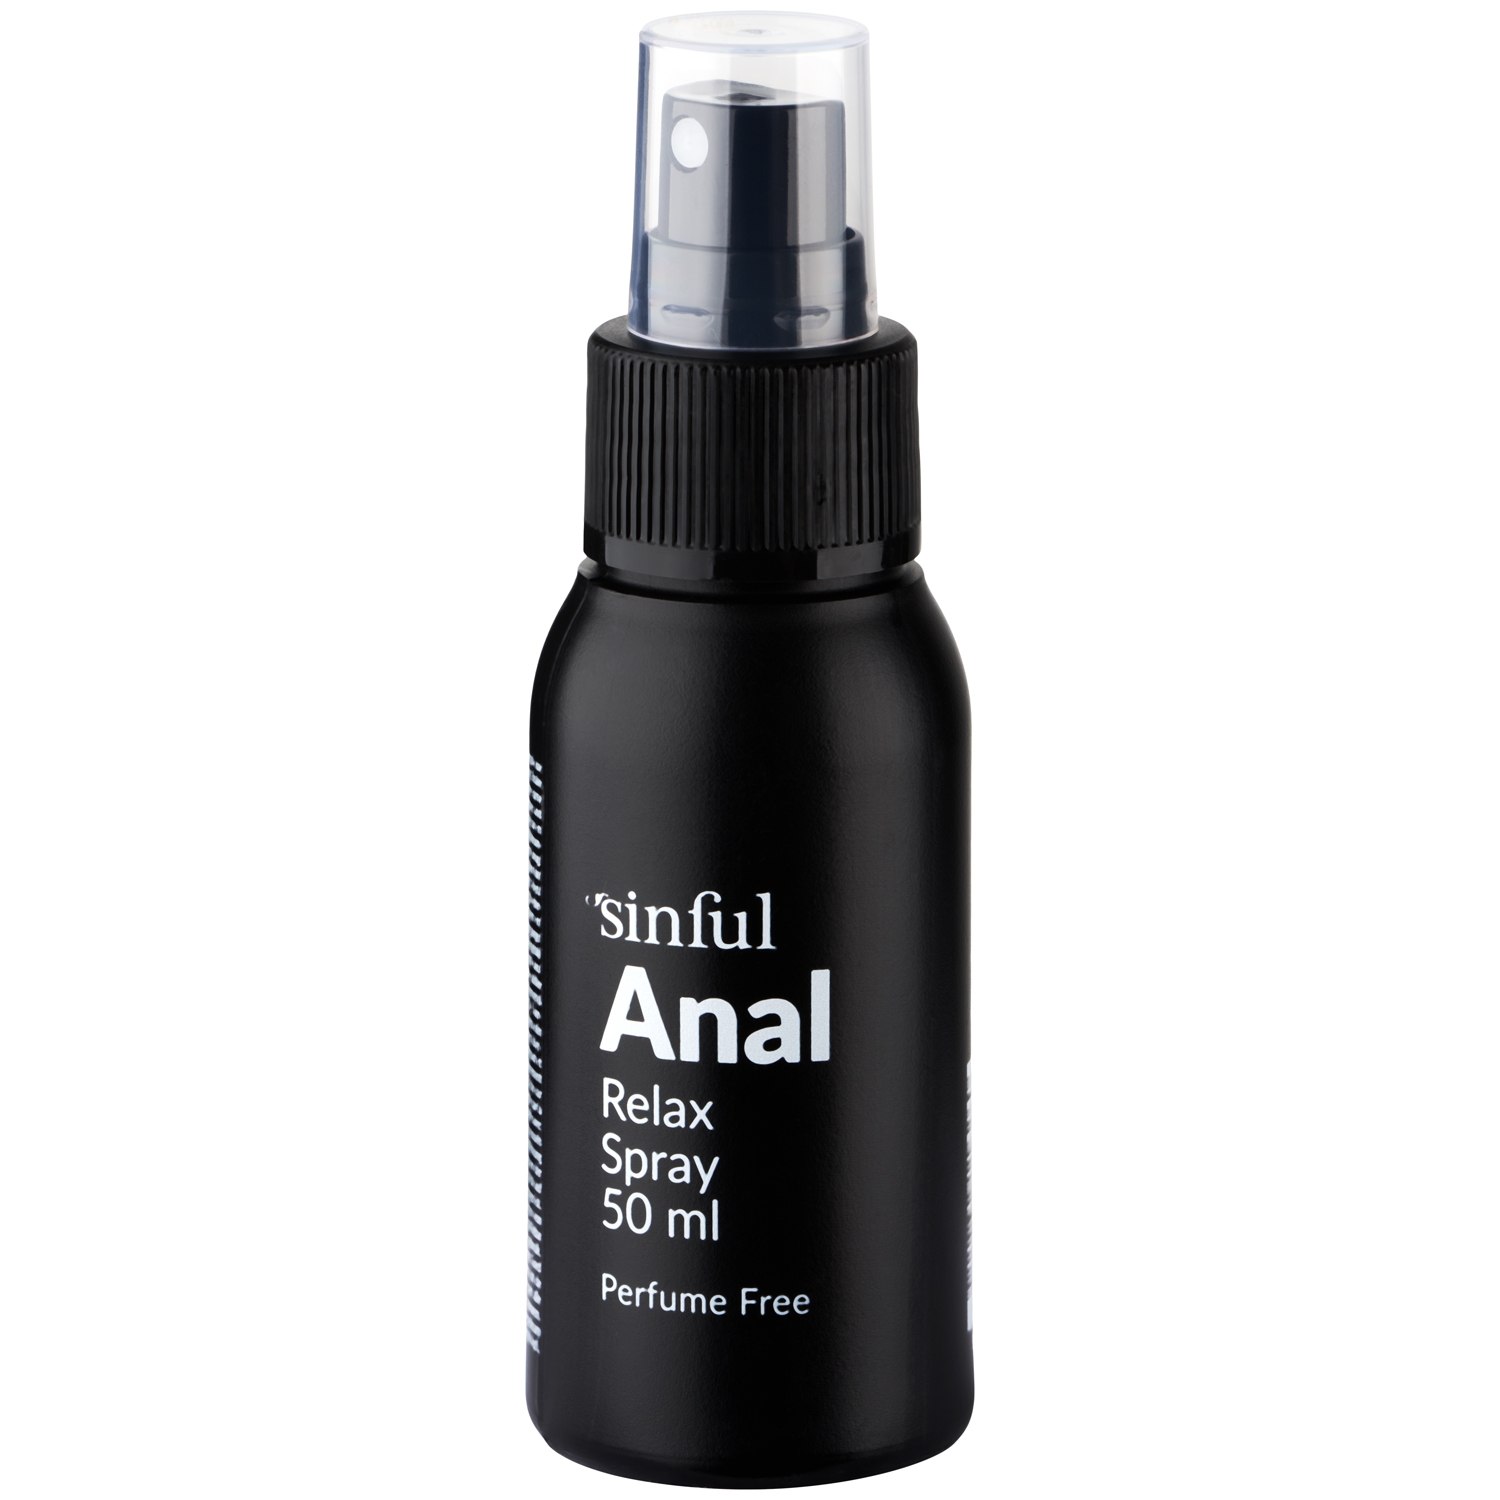 Sinful Anal Relax Spray 50 ml     - Sort